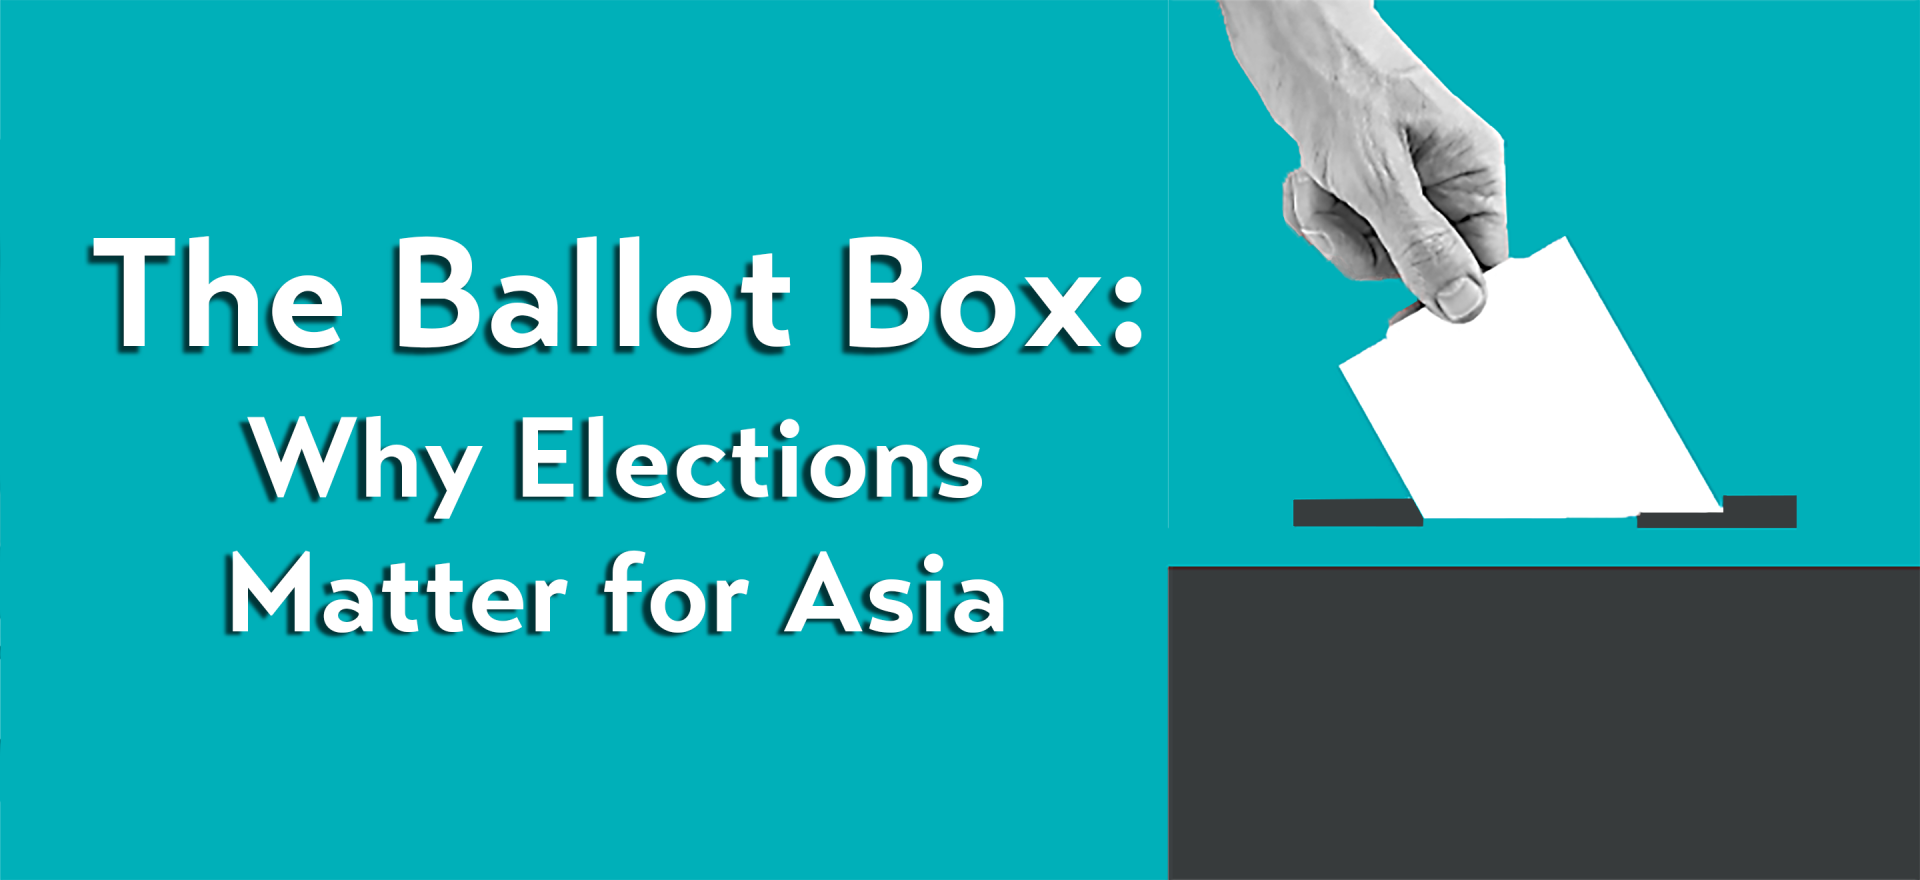 The Ballot Box: Why Elections Matter for Asia